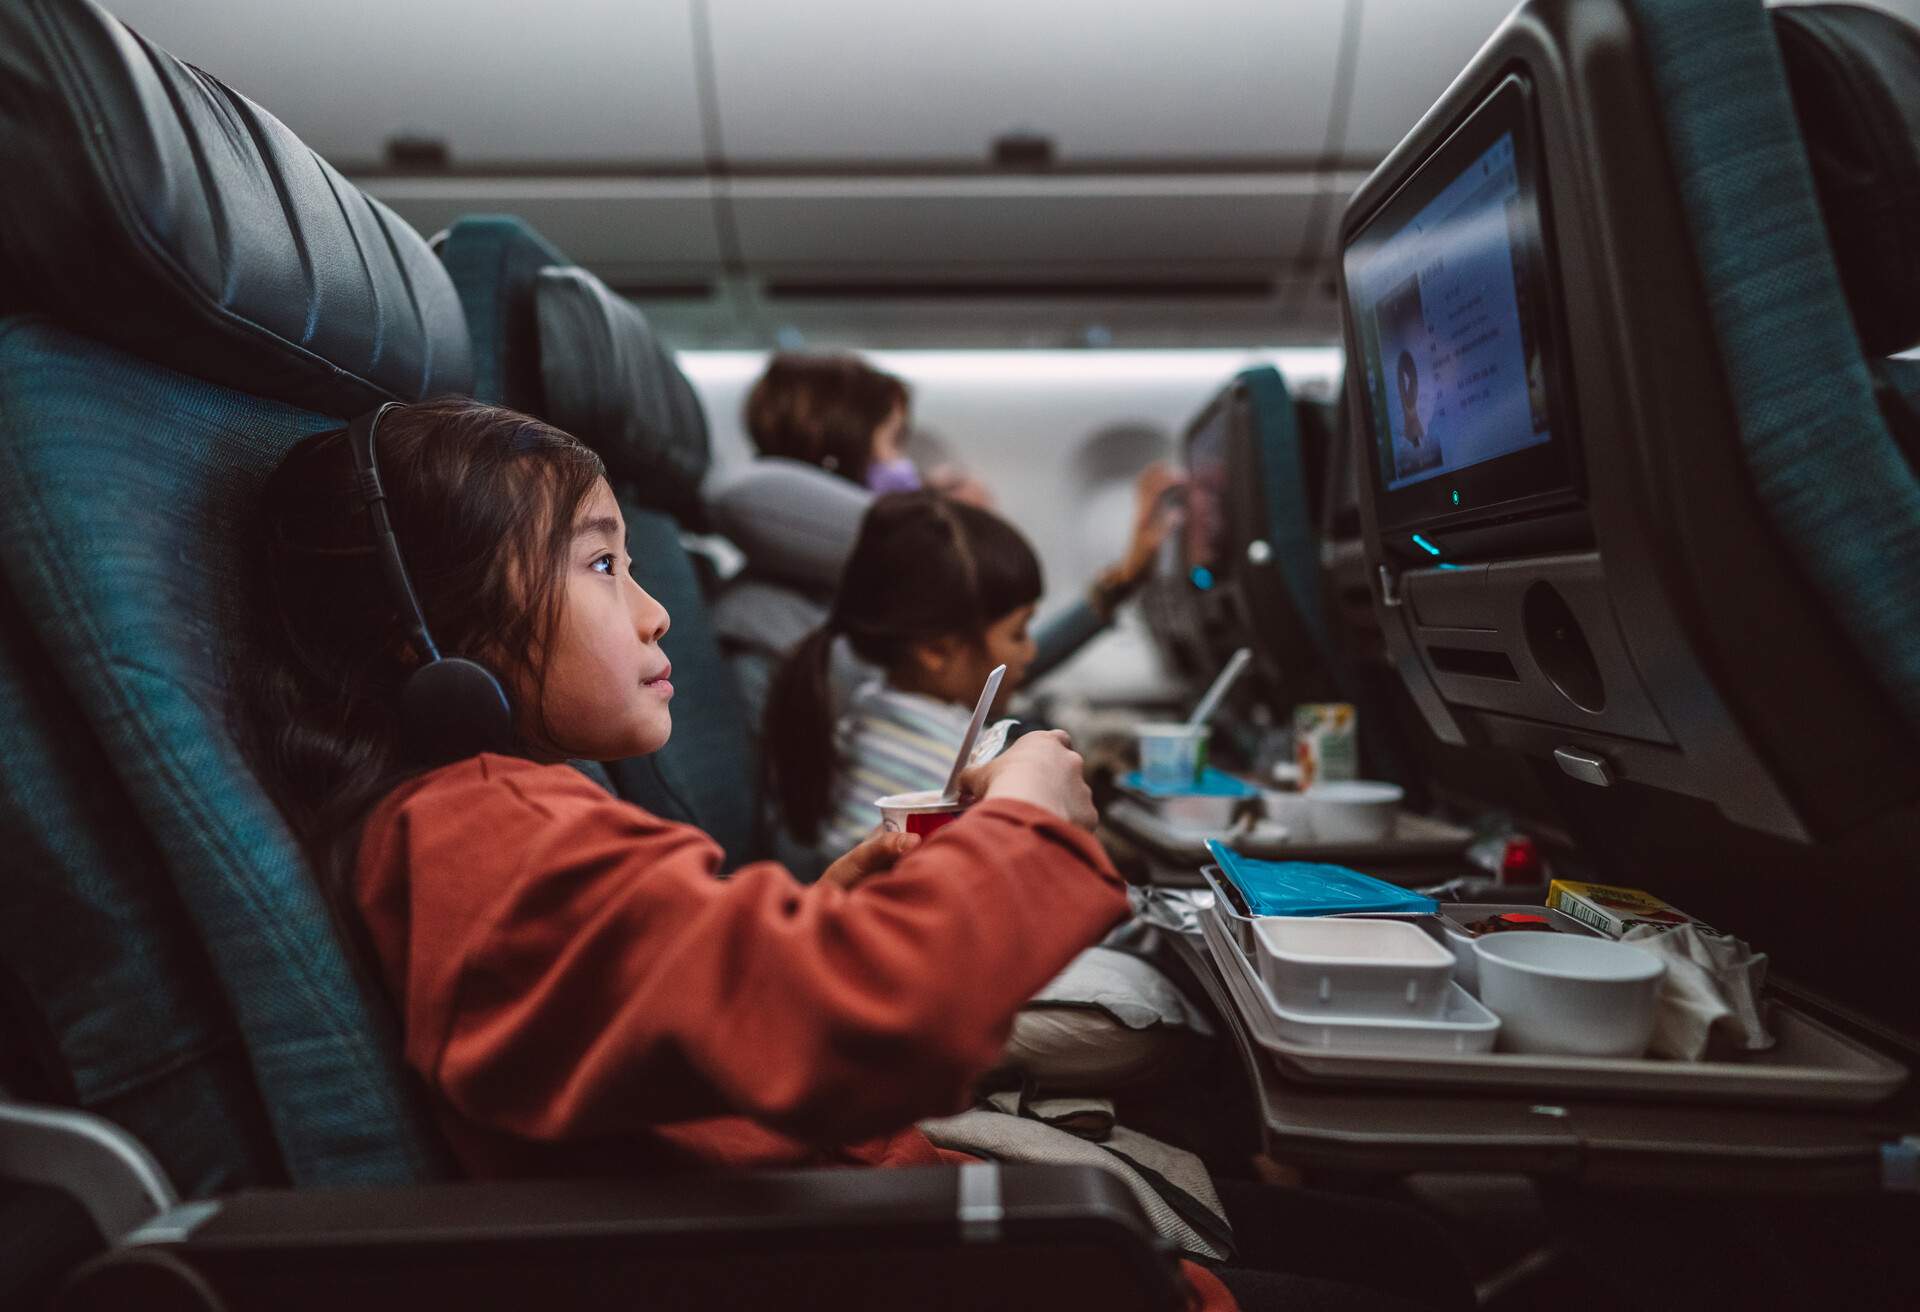 Child on plane watching a movie with food tray